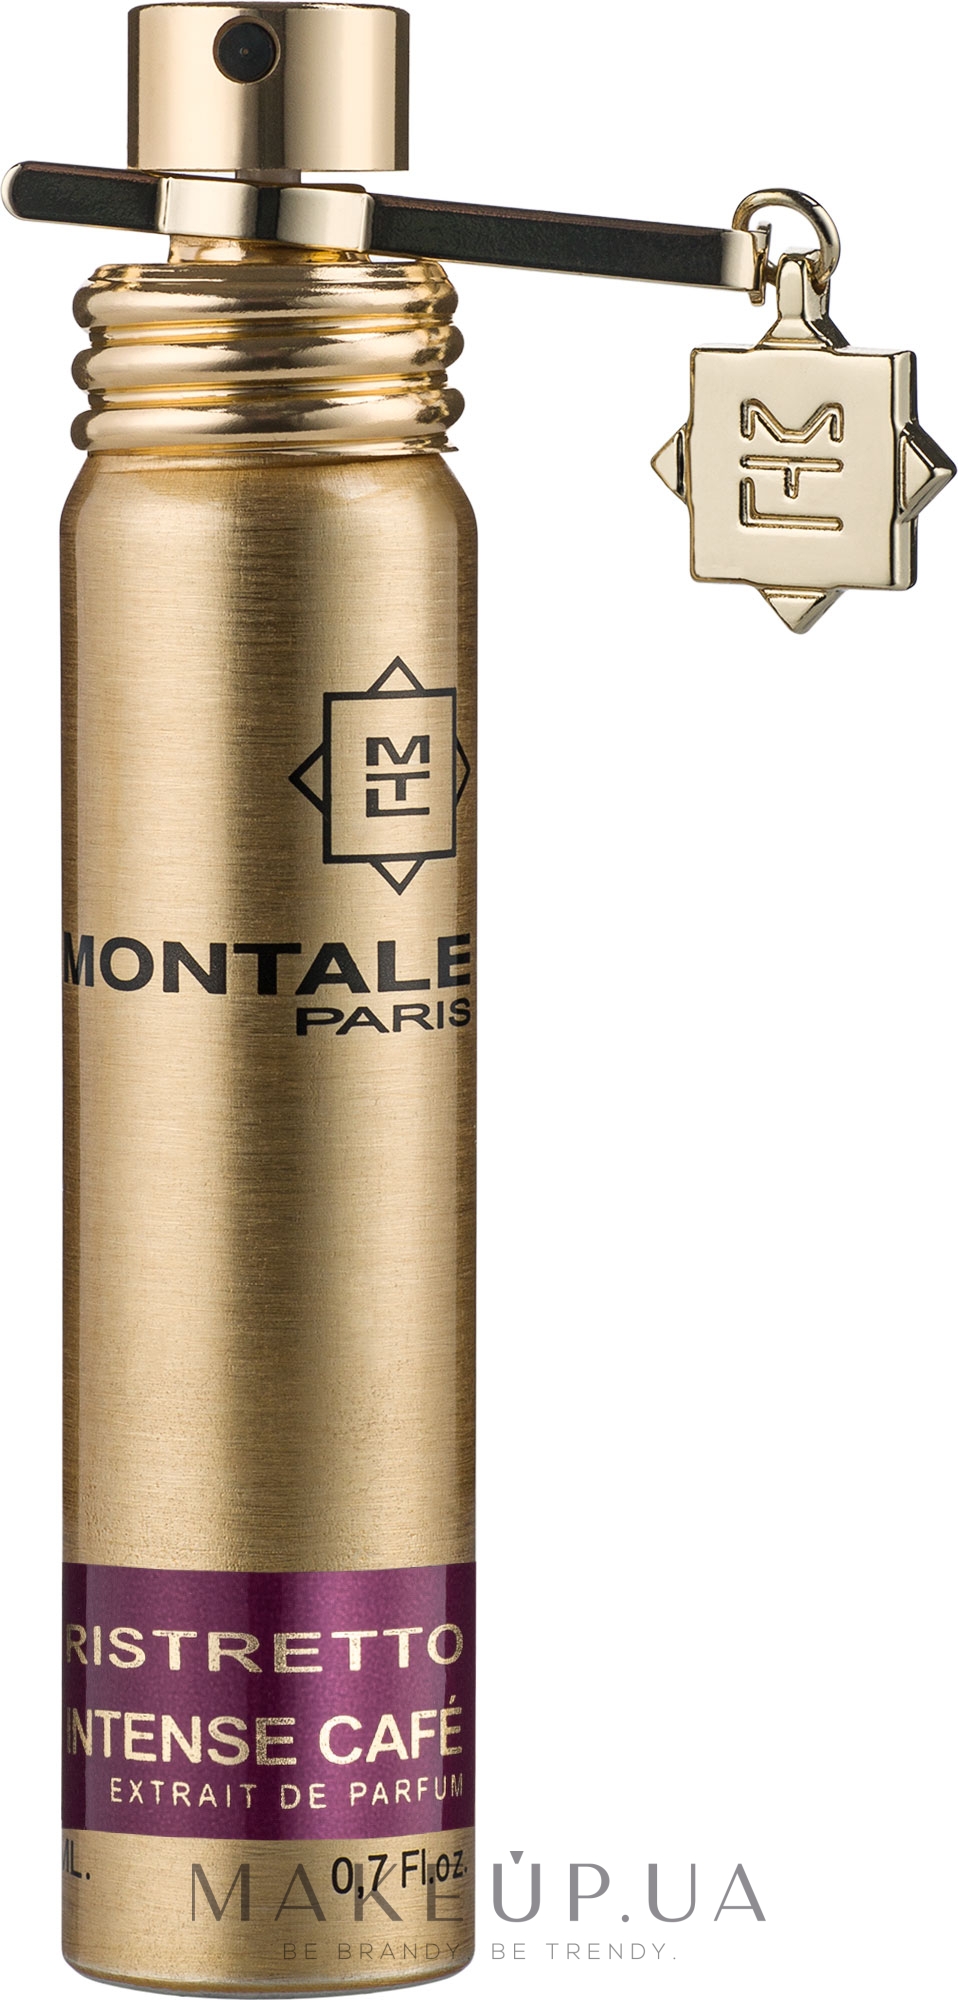 Montale Ristretto Intense Cafe Travel Edition